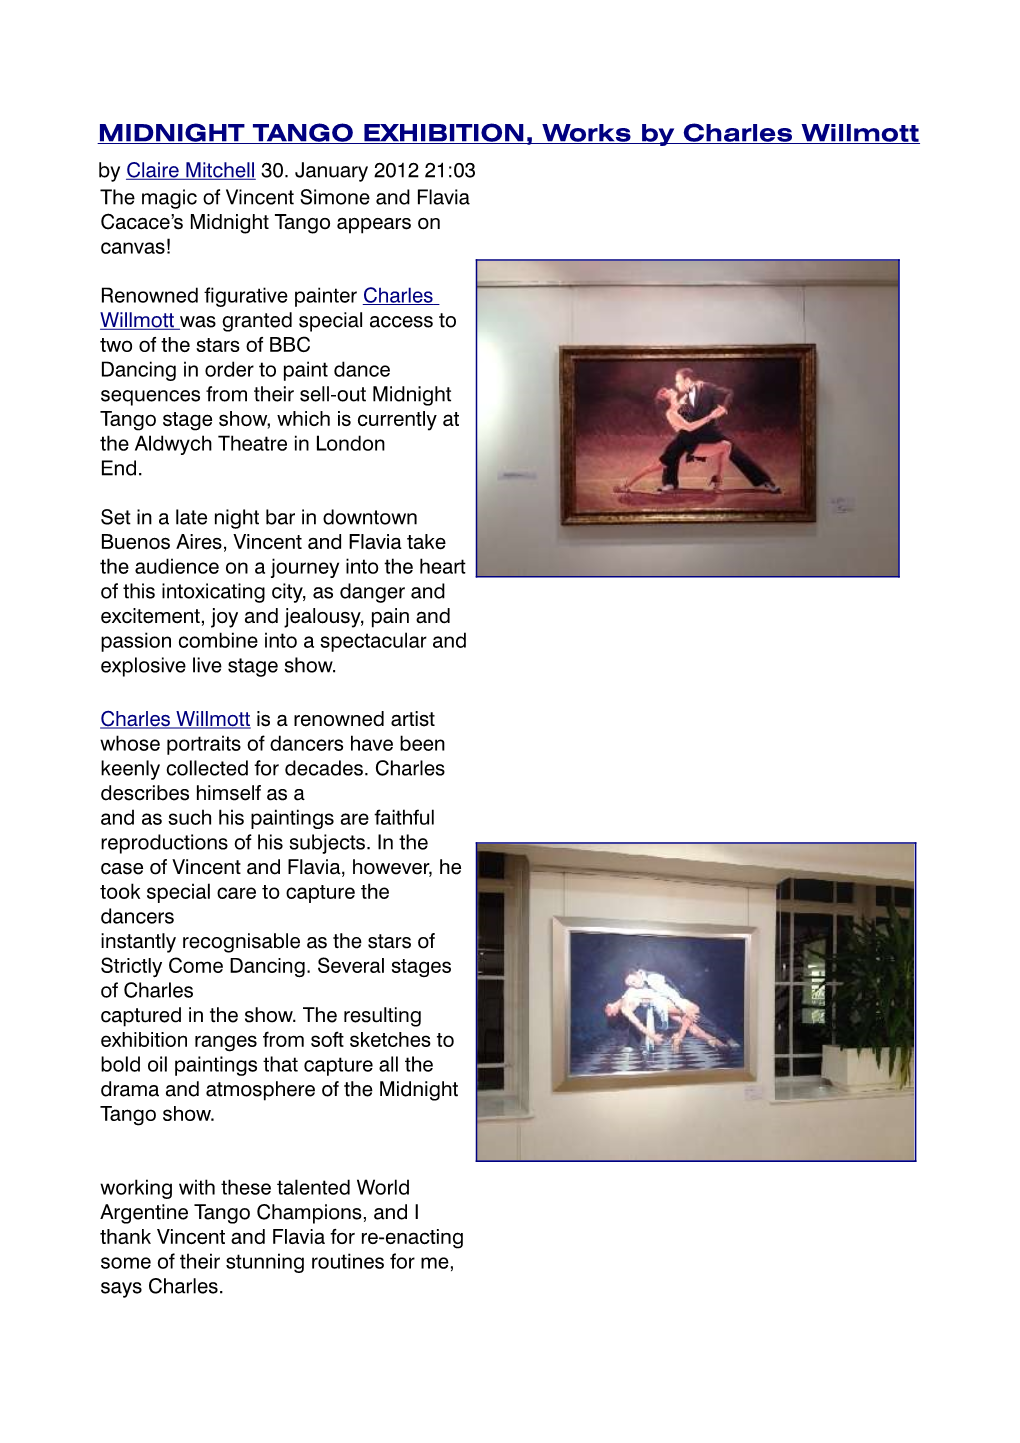 MIDNIGHT TANGO EXHIBITION, Works by Charles Willmott by Claire Mitchell 30